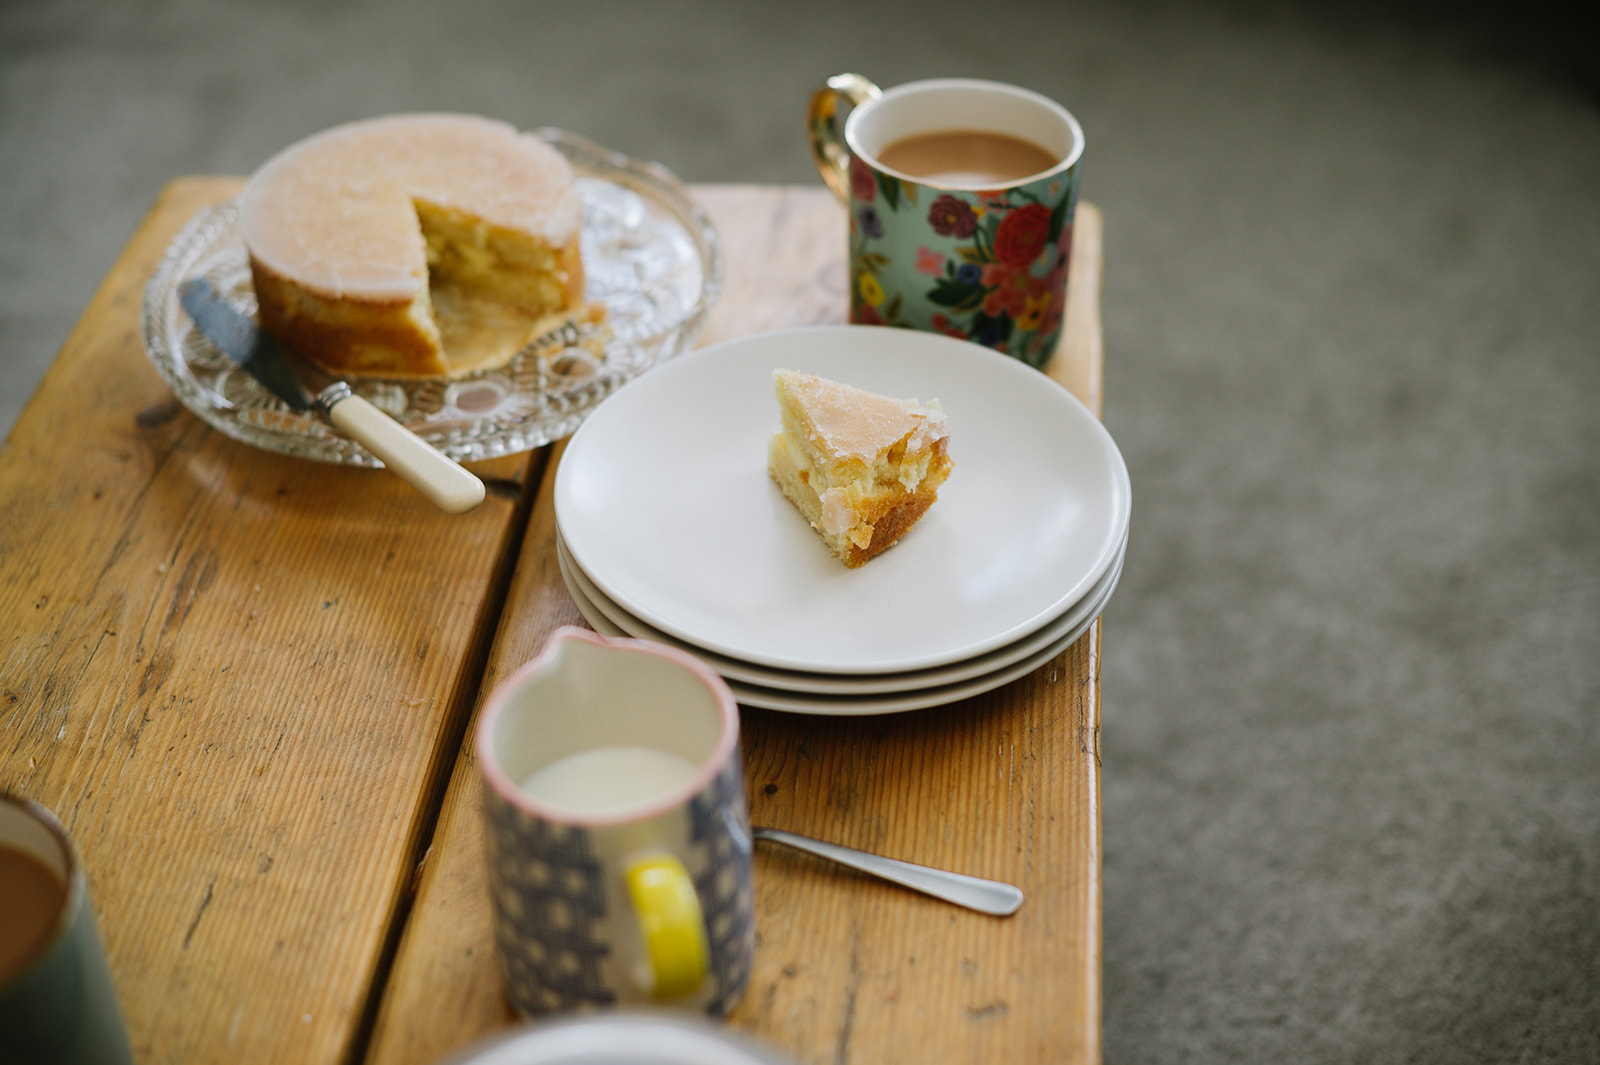 details of cake and tea cups on a wooden table